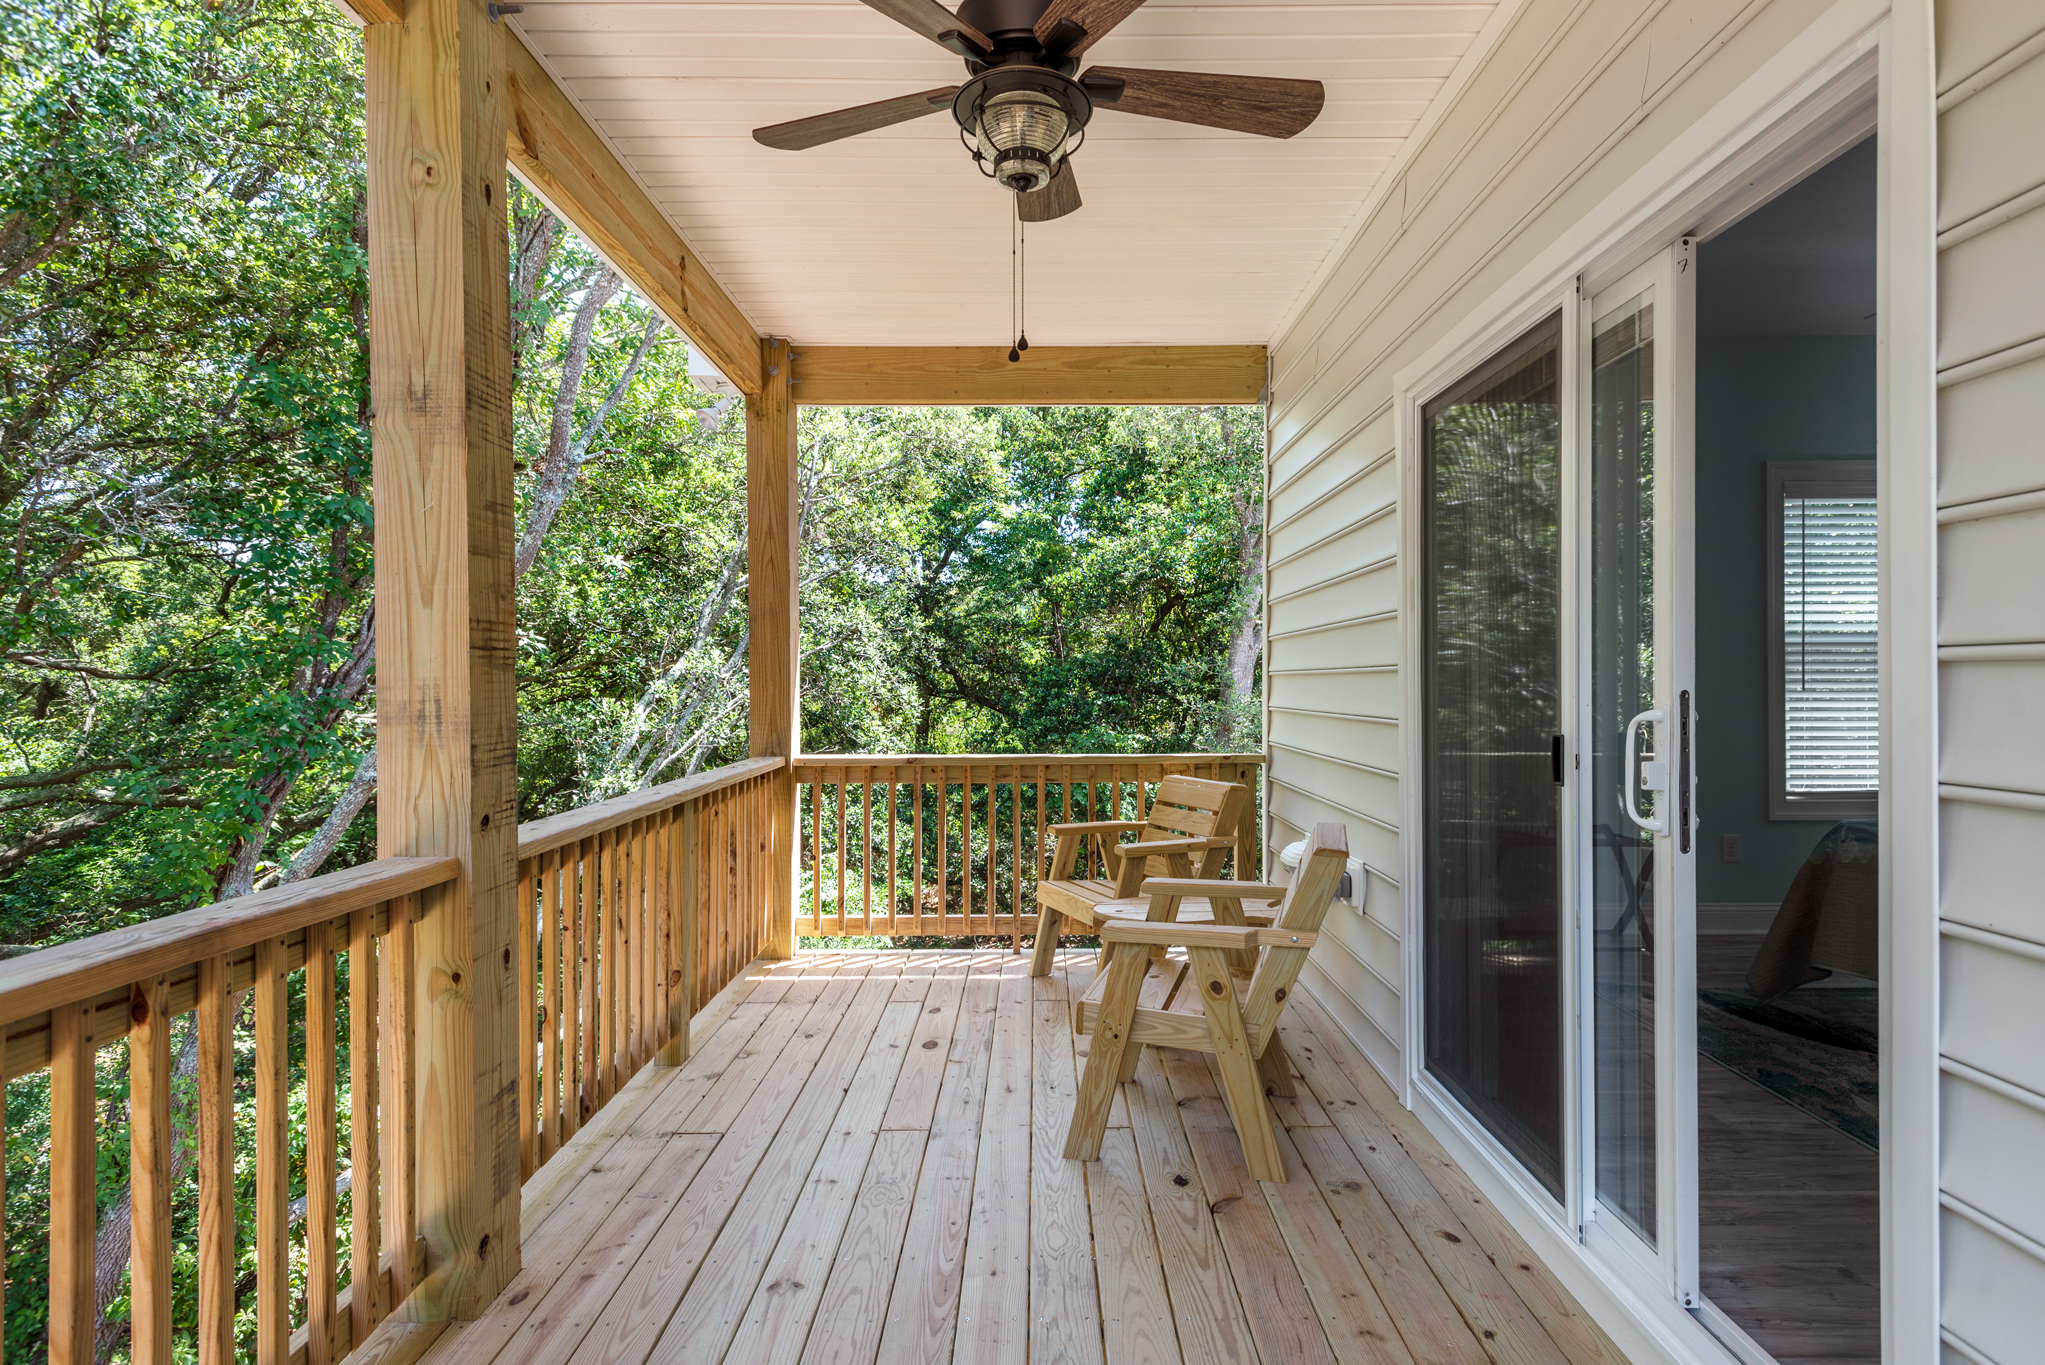 JR9706: Tranquility Cove | Top Level Bedroom 1 Porch